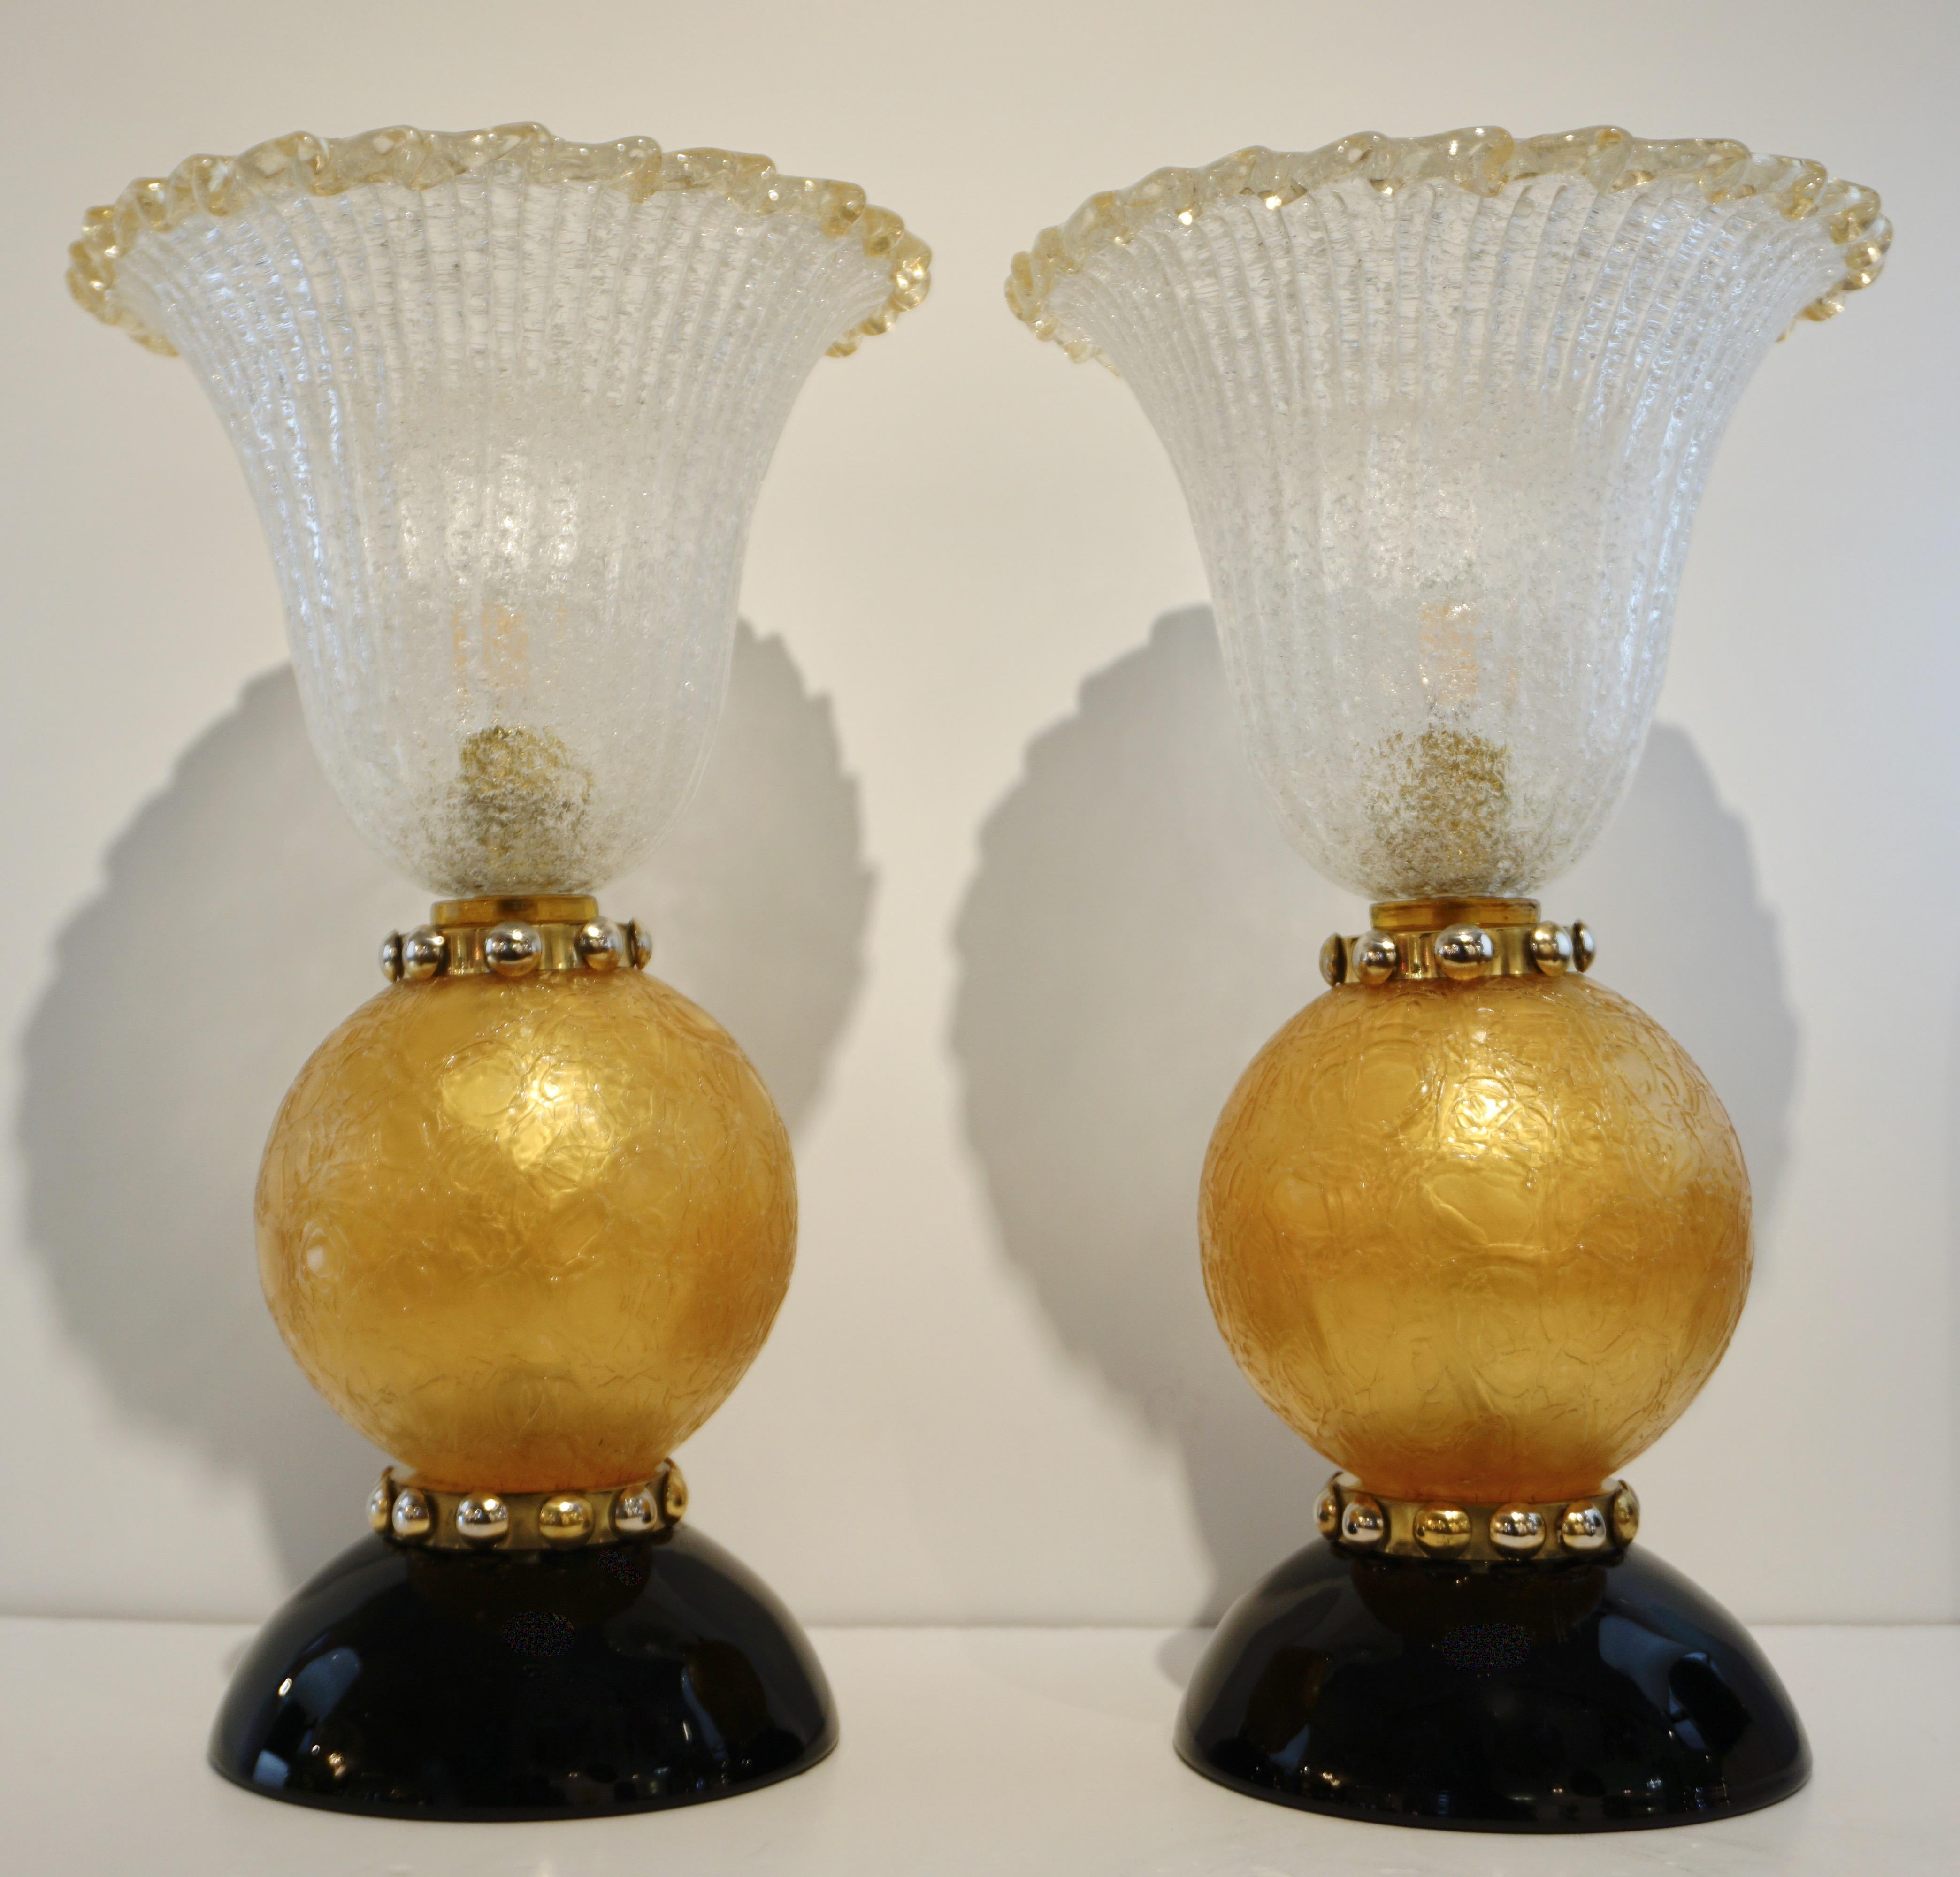 Italian Art Deco Style Gold Black Lamps with Barovier Crystal Murano Glass Shade 6